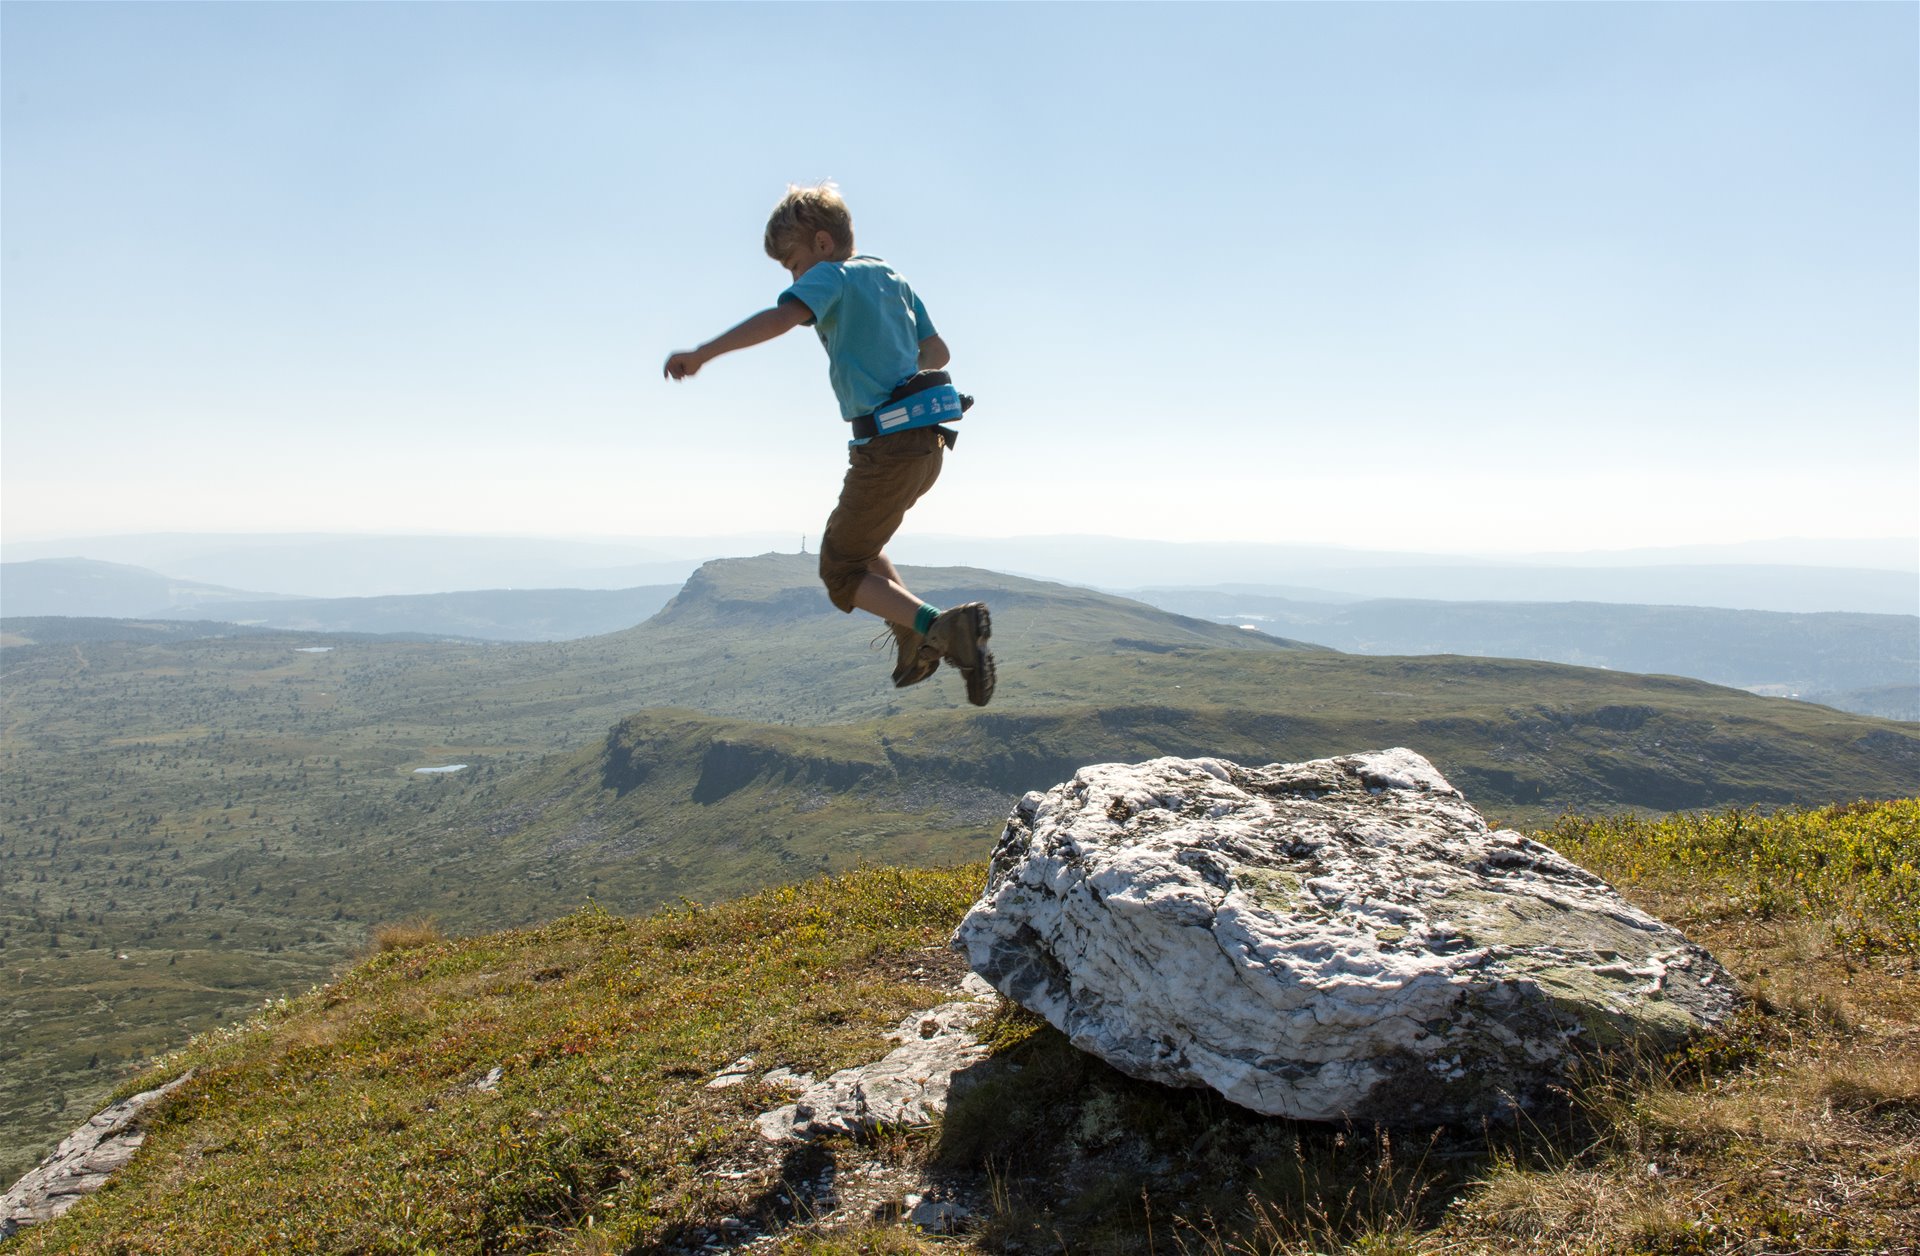 Boy jumping from rock on mountain.